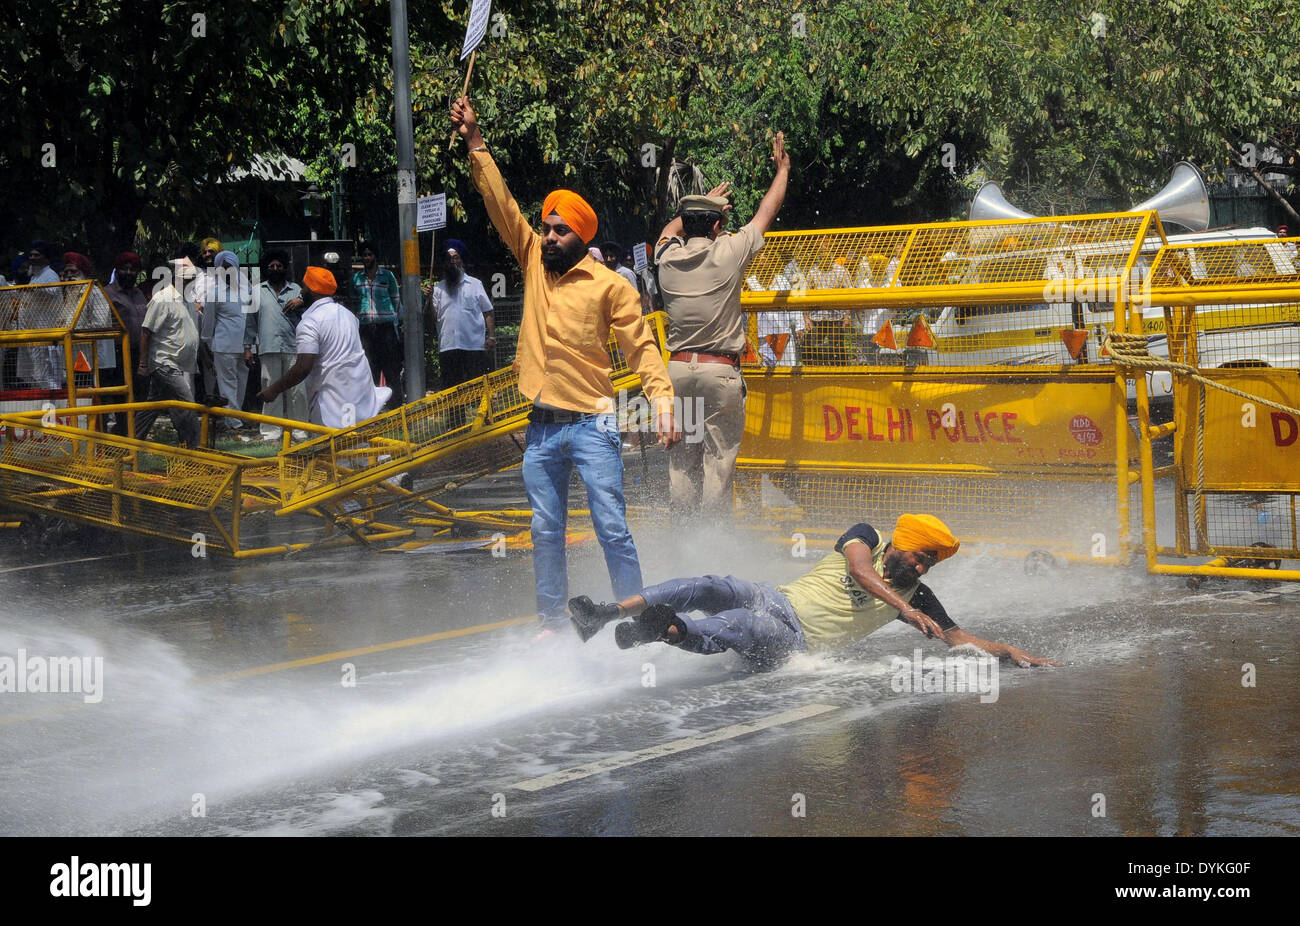 New Delhi, India. 21st April 2014. Indian Sikh protesters face water canons during a protest against Congress party leader and former chief minister of Punjab state Amarinder Singh for his recent remarks on the country's 1984 anti-Sikh riots in New Delhi, India, April 21, 2014. Singh in a recent television interview said party leader Jagdish Tytler, one of the accused, had no role in the 1984 riots that killed more than 3,000 Sikhs. Credit:  Xinhua/Alamy Live News Stock Photo